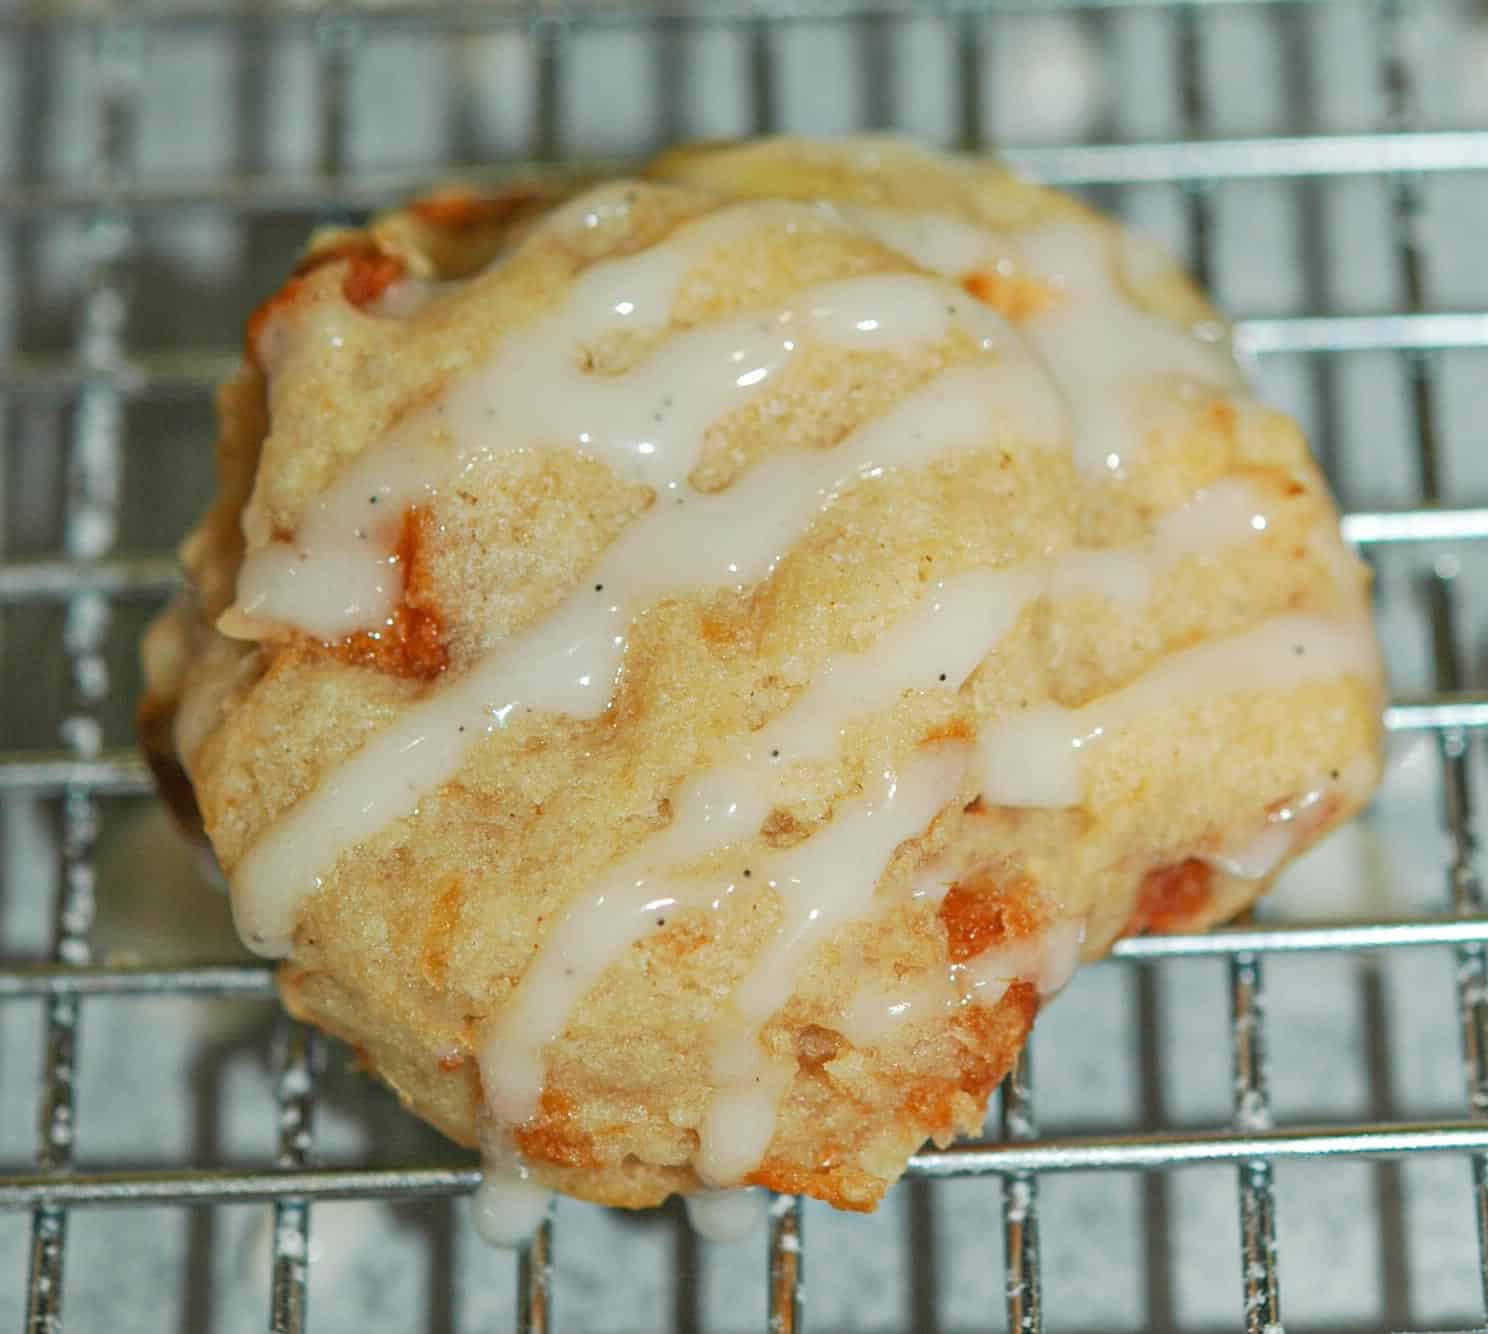 Apple Pie A La Mode single cookie with the icing drizzled on in a stripe pattern sitting on a wire rack.